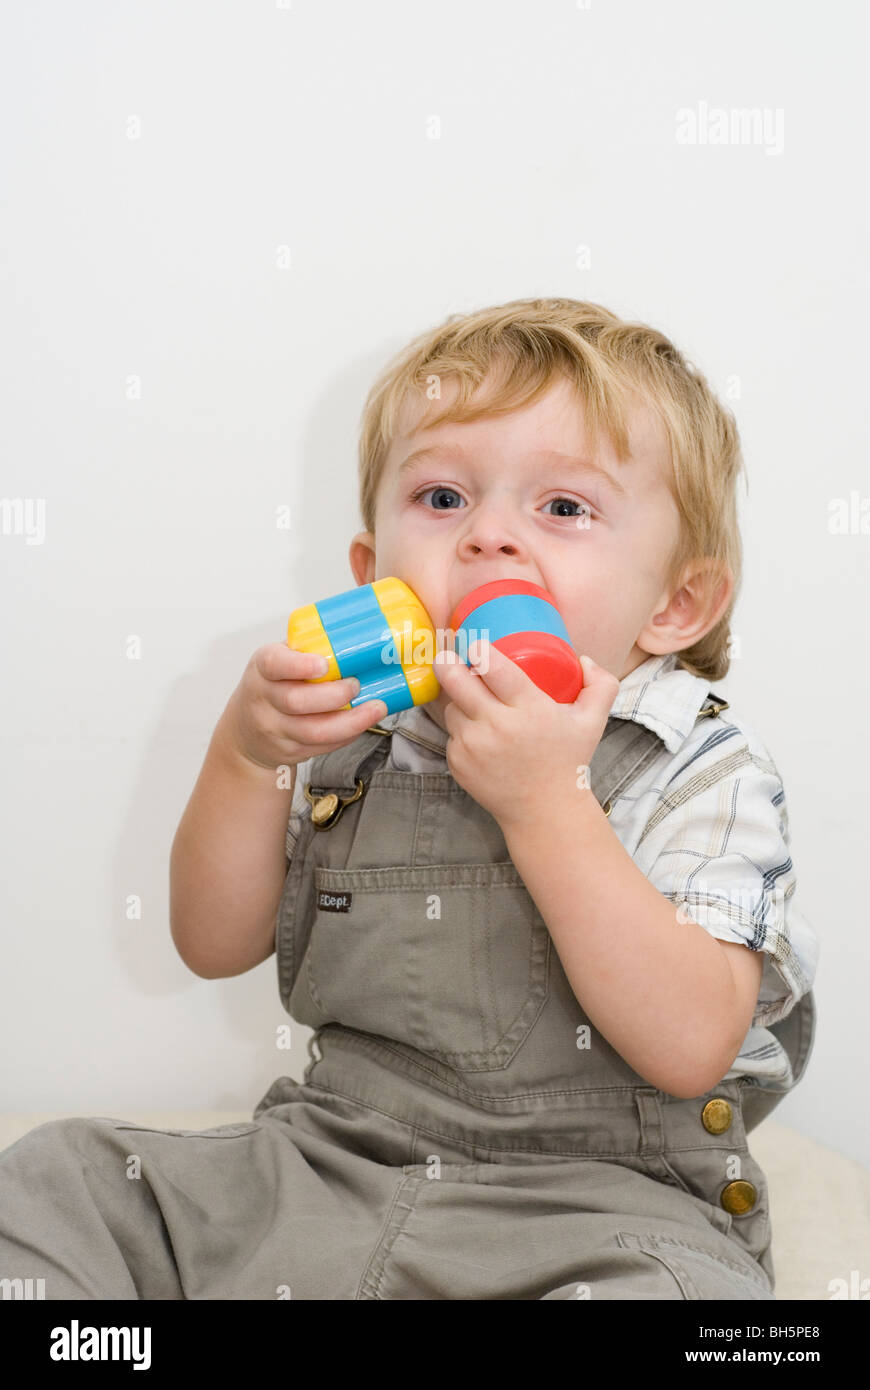 Toddler Boy Aged 19 Months Stuffing Rattles from Shape Sorter Toy in Mouth, Isolated on White Stock Photo